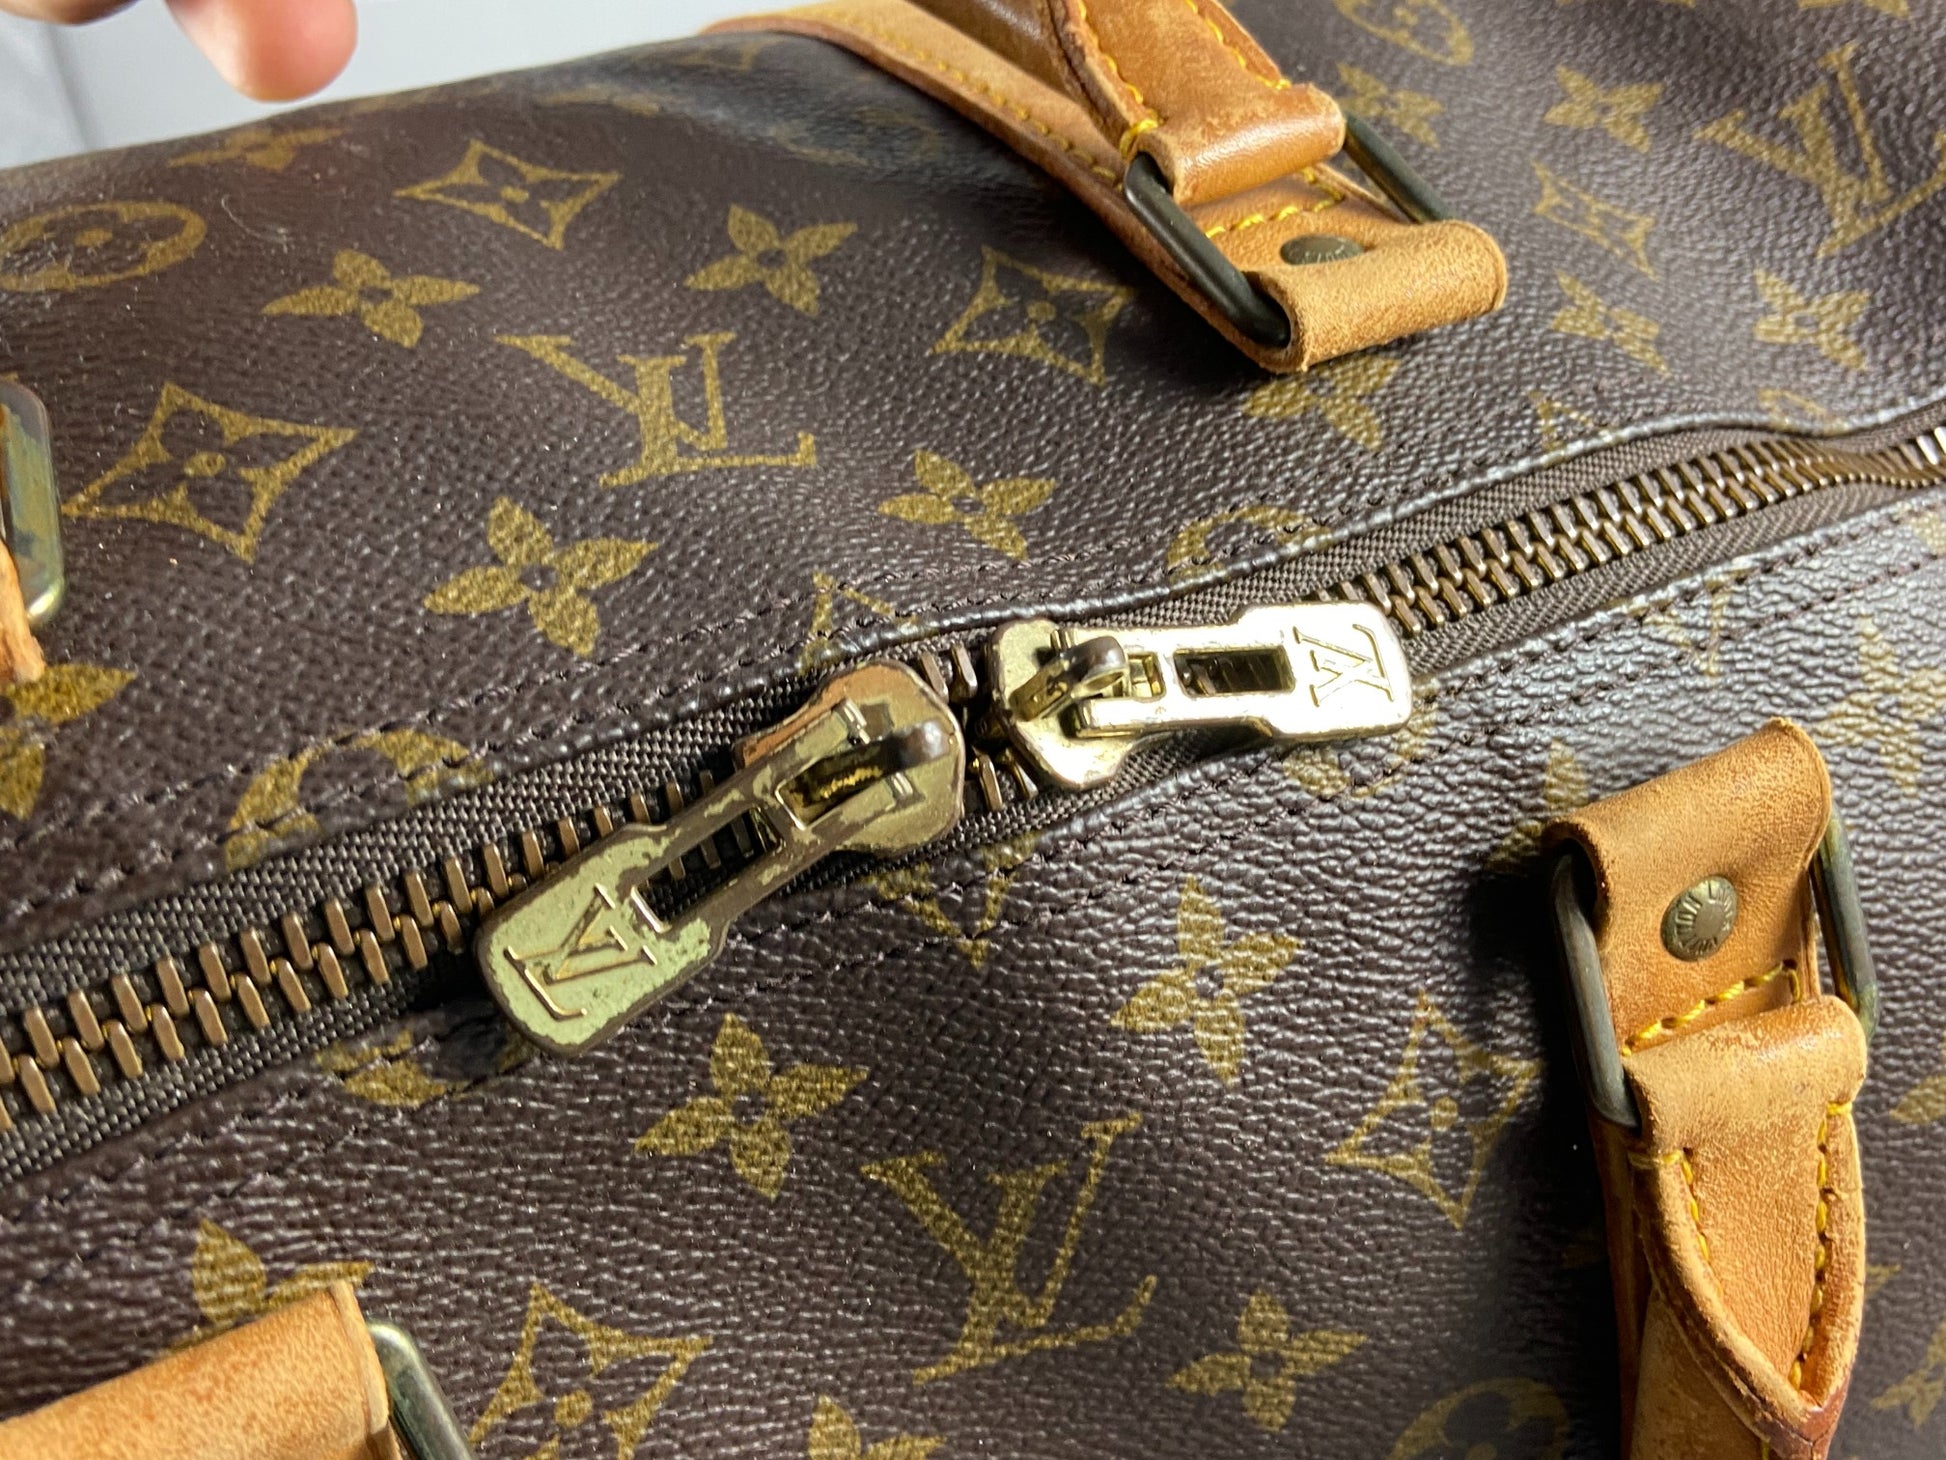 LOUIS VUITTON. Keepall 55 bag in monogram canvas and nat…